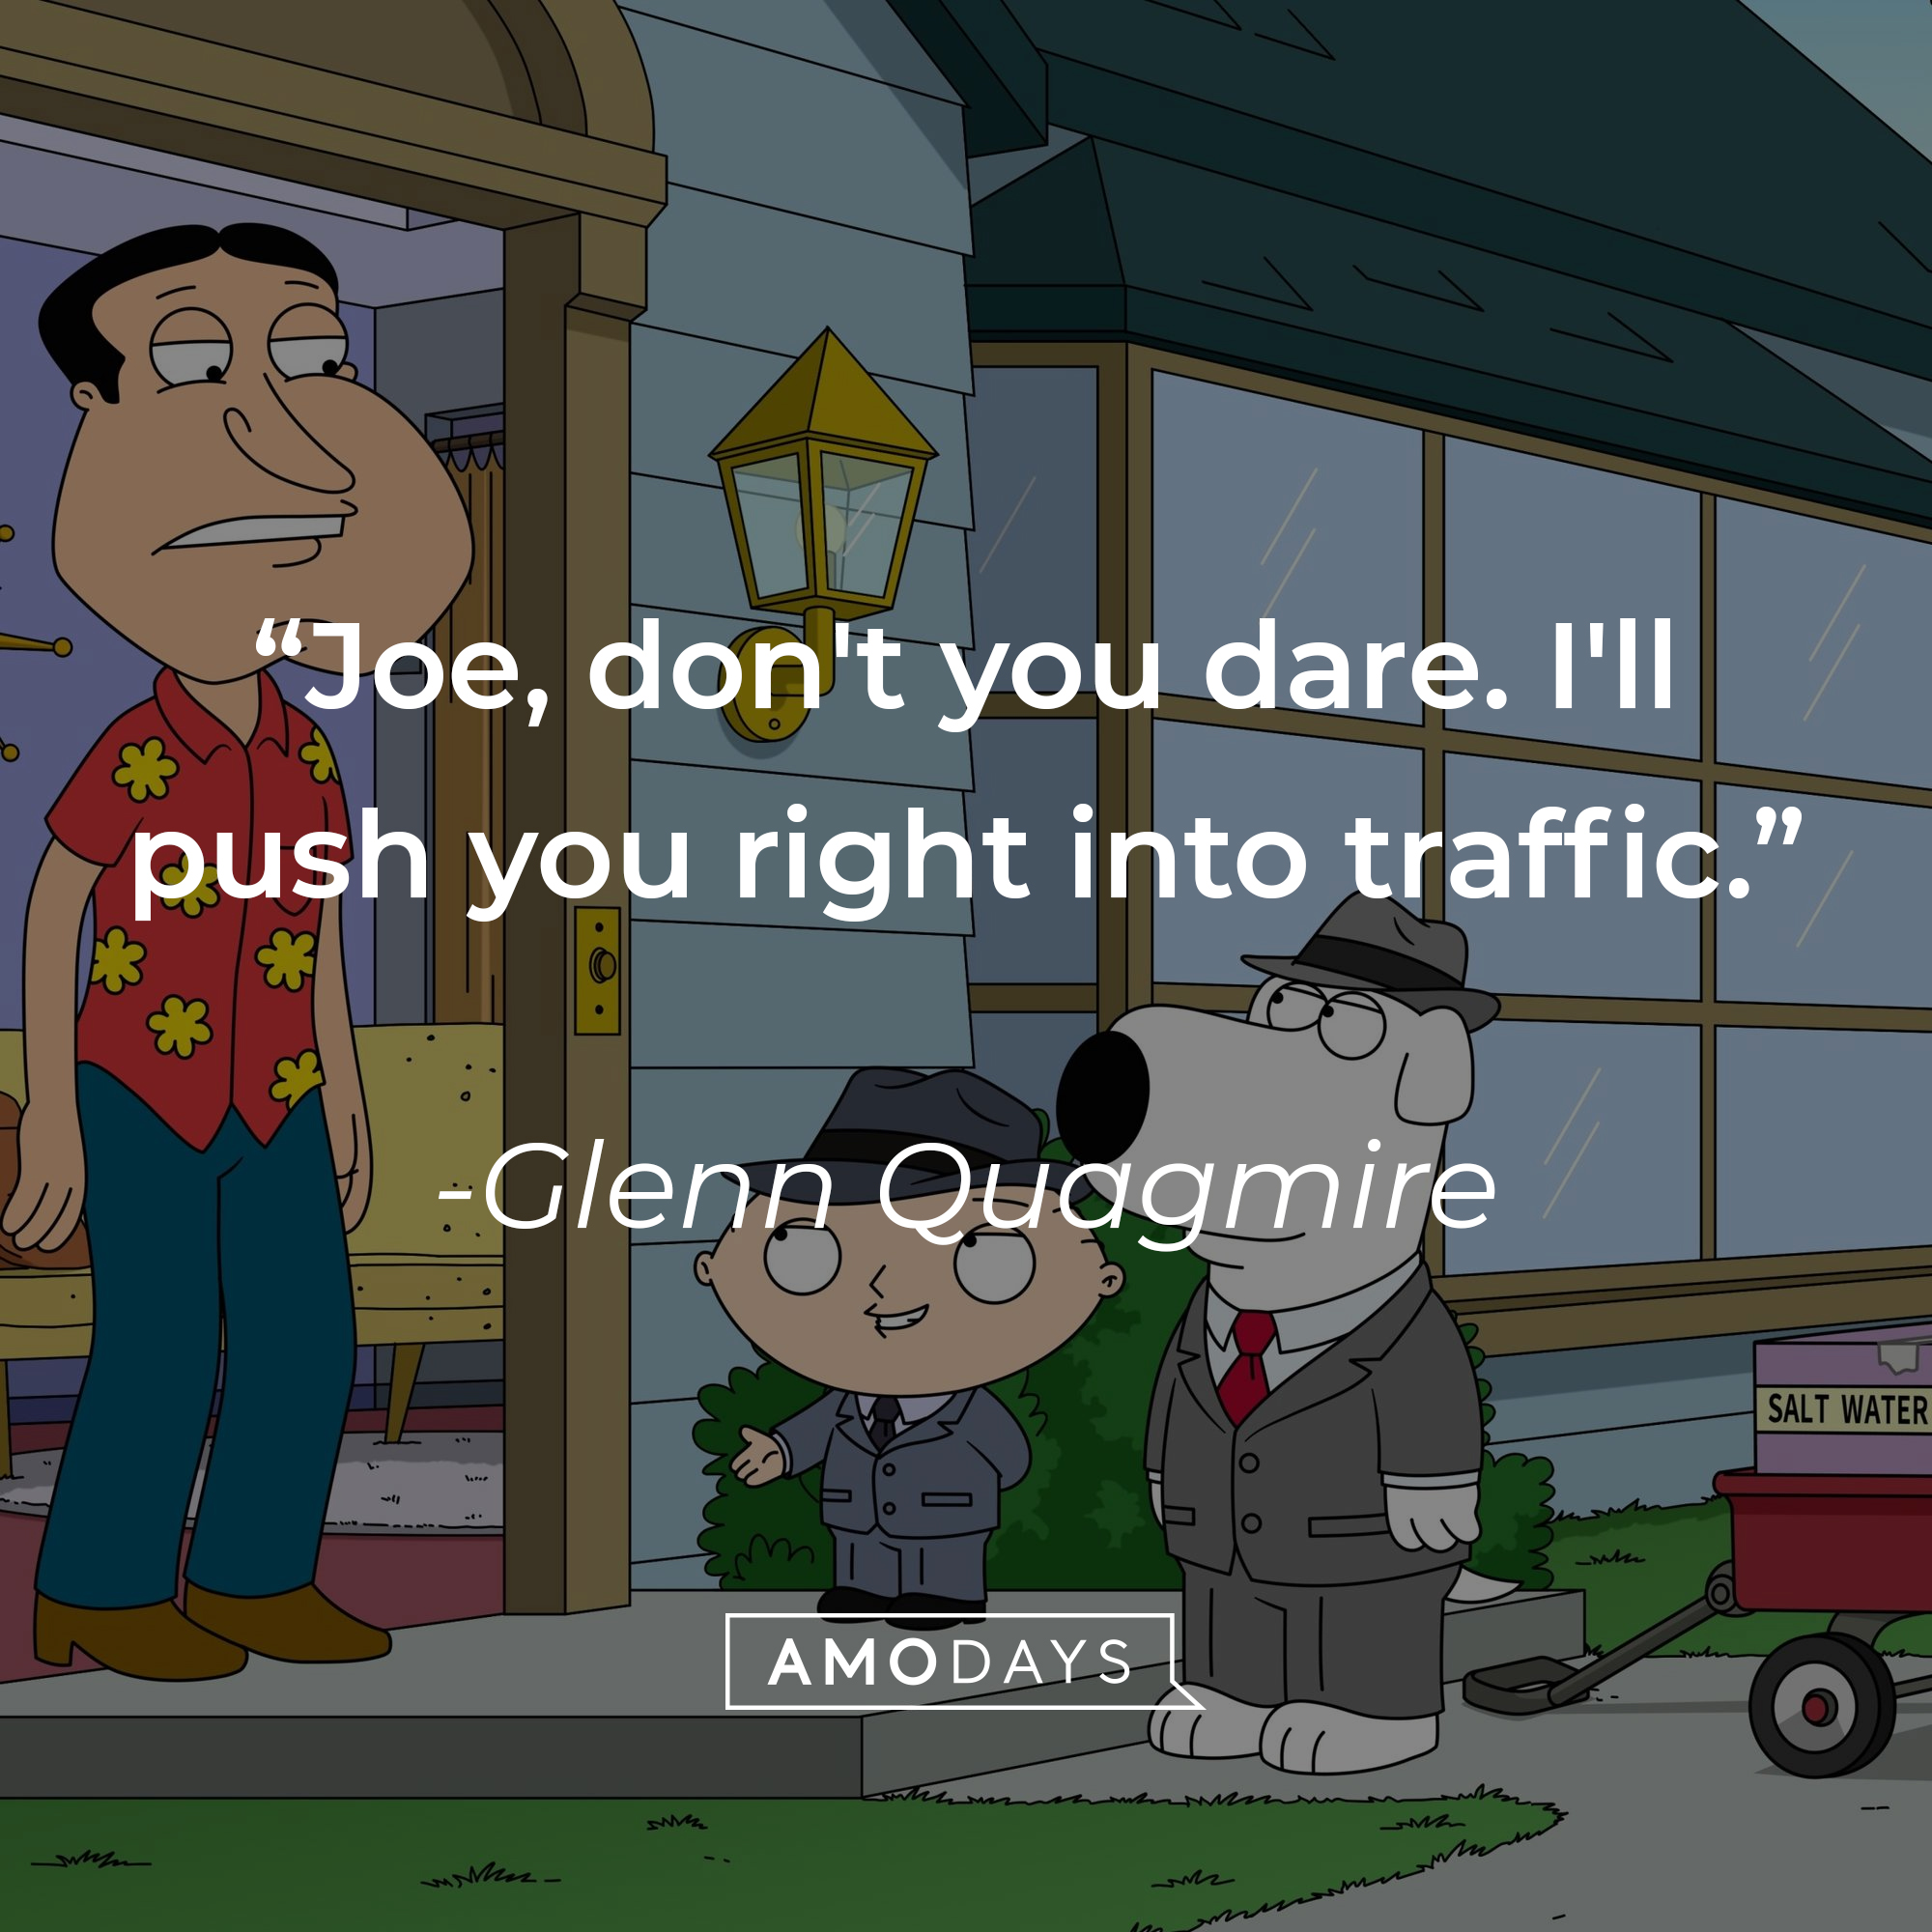 Glenn Quagmire with two other characters from “Family Guy” and his quote: “Joe, don't you dare. I'll push you right into traffic.” | Source: facebook.com/FamilyGuy